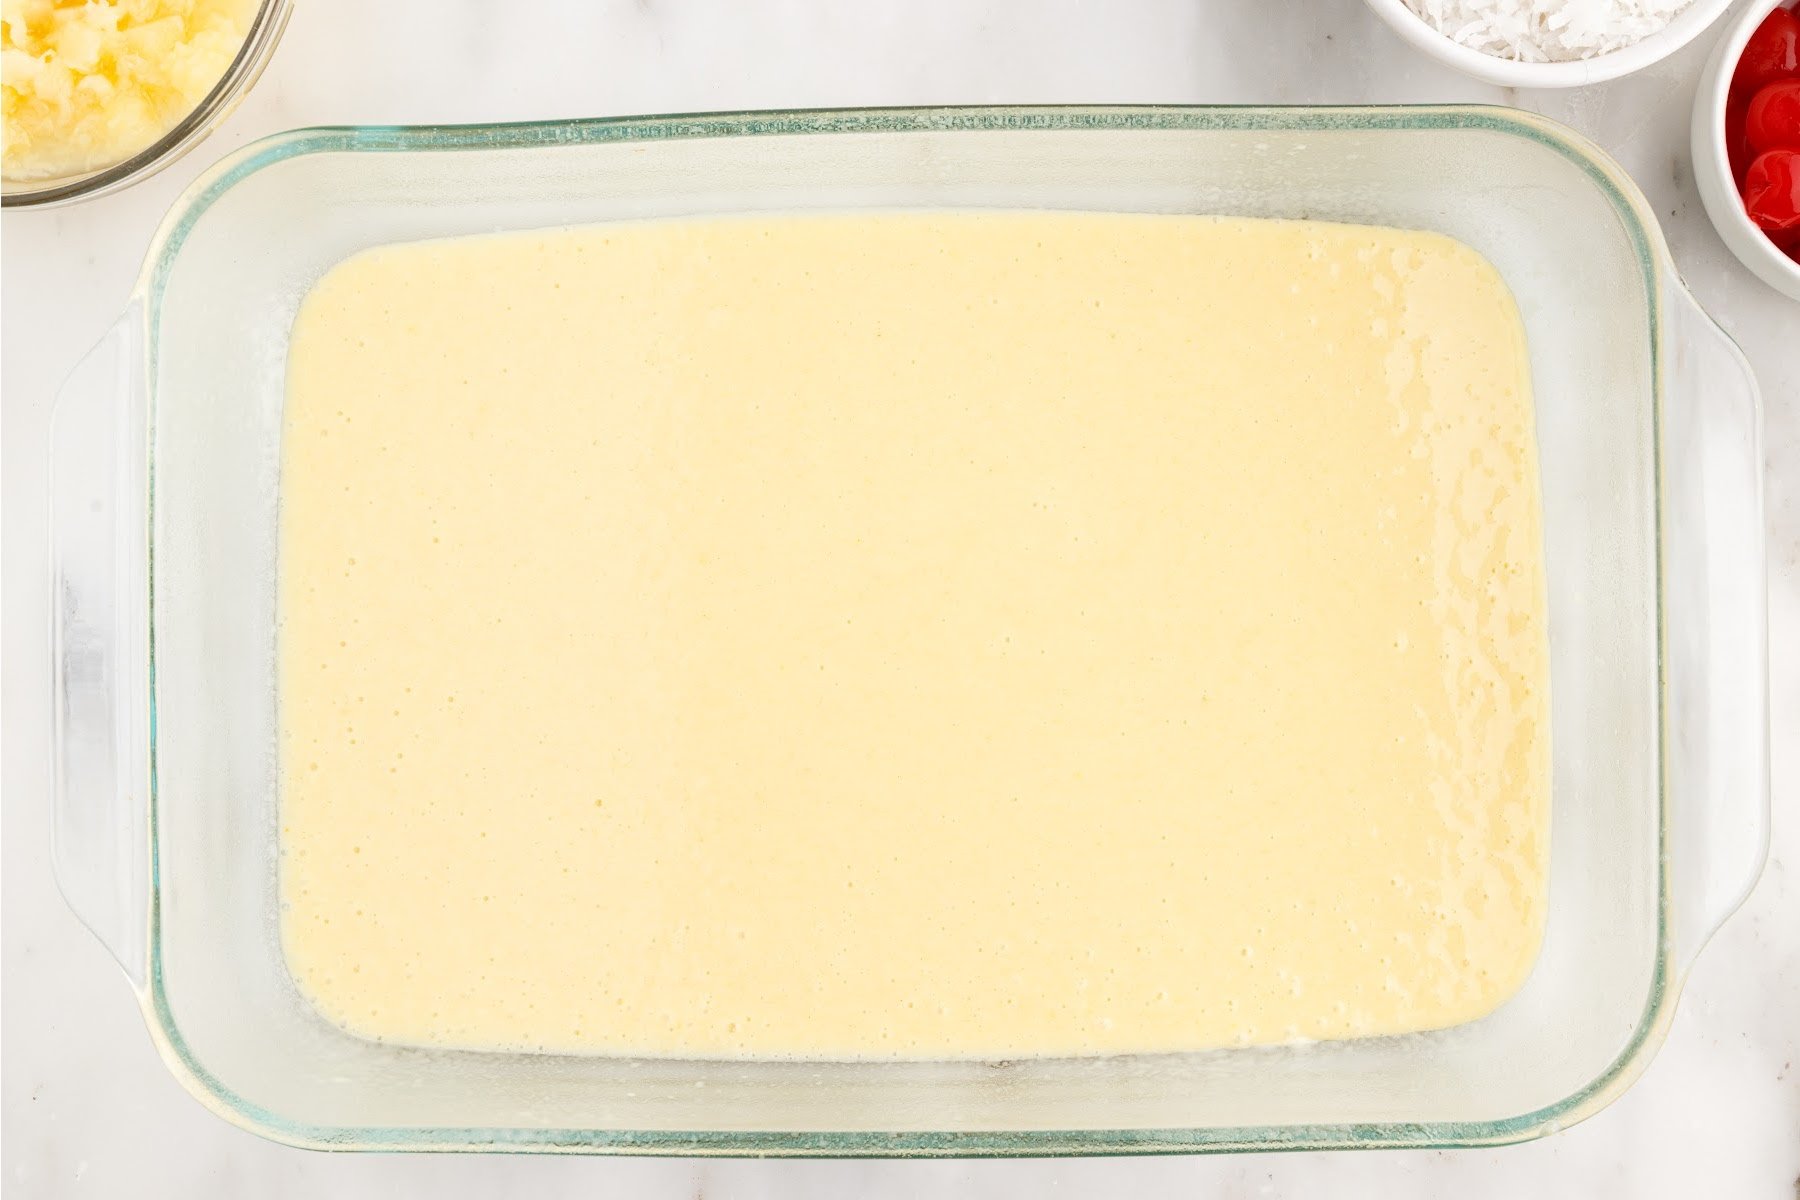 Millionaire’s Cake cake batter in a 9x13 glass dish.